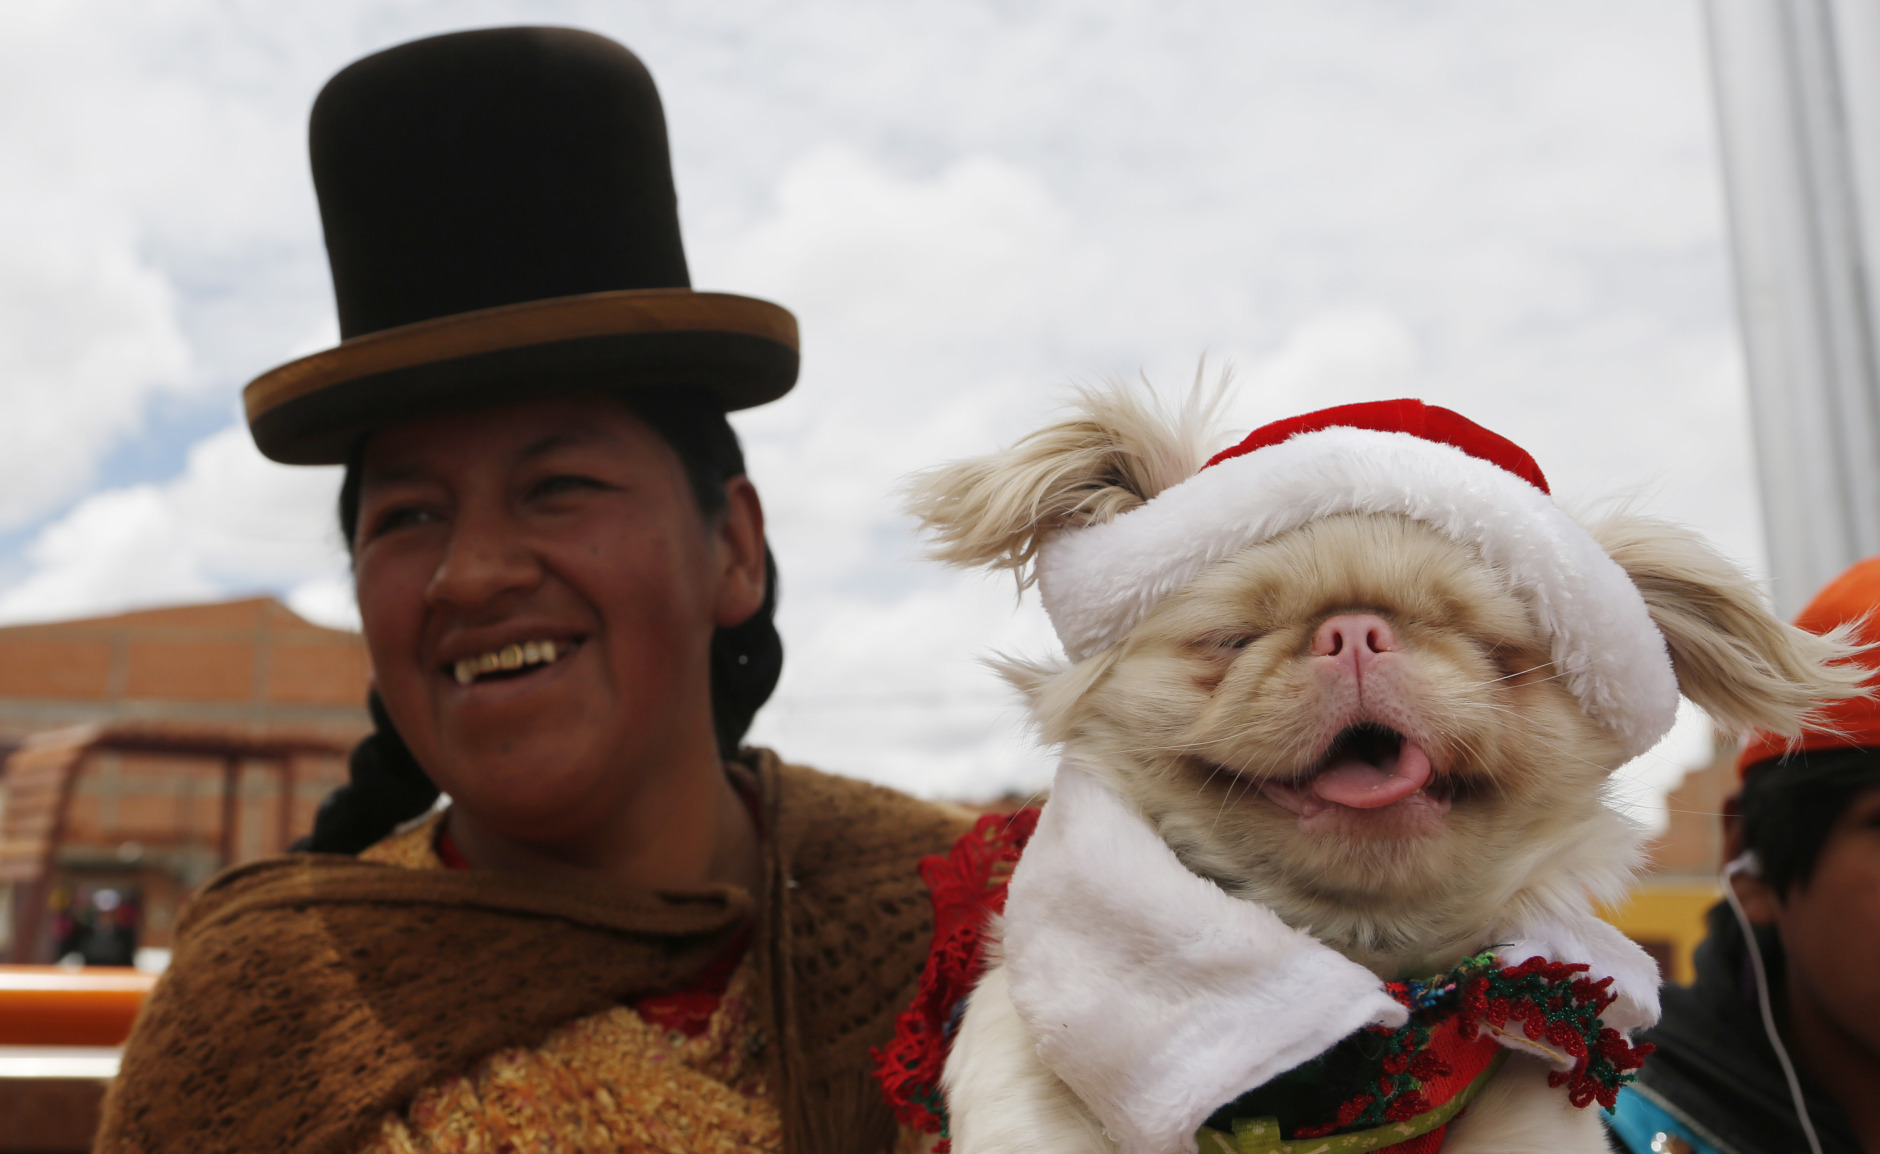 An Aymara indigenous woman carries her pet to a Christmas costume contest for dogs in El Alto, Bolivia, Saturday, Dec. 20, 2014. About 50 dogs participated in the event organized by zoonosis. (AP Photo/Juan Karita)